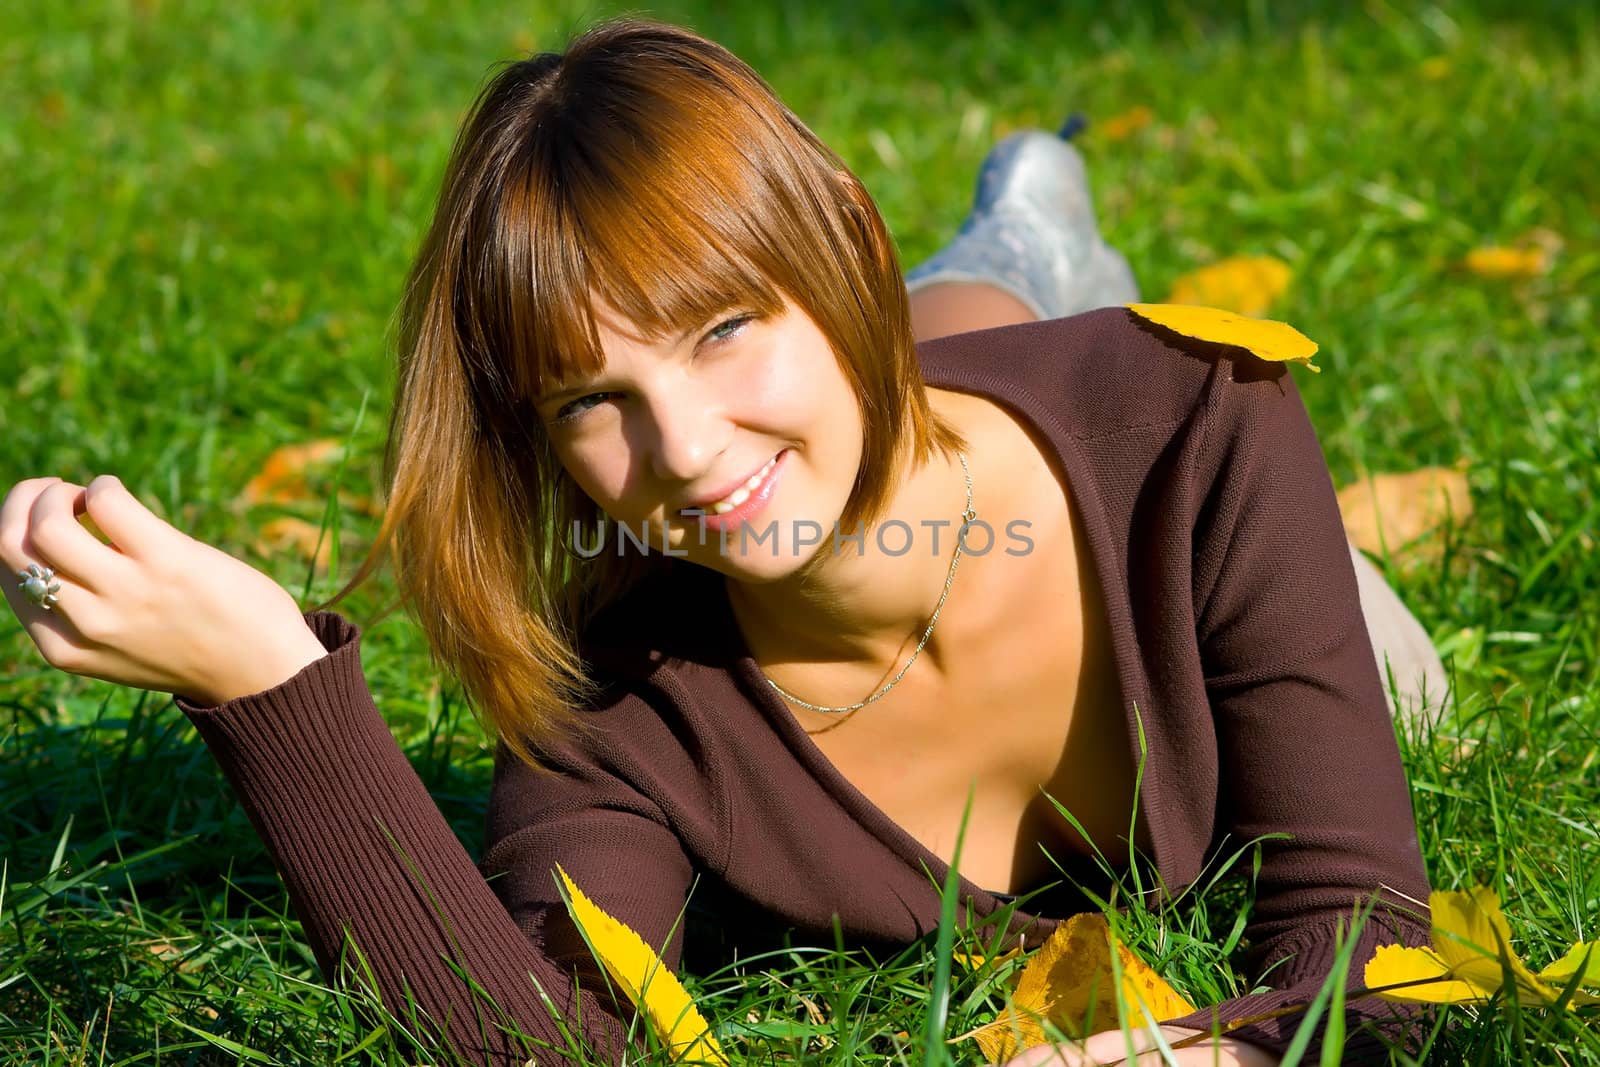 The young girl in autumn park during a leaf fall